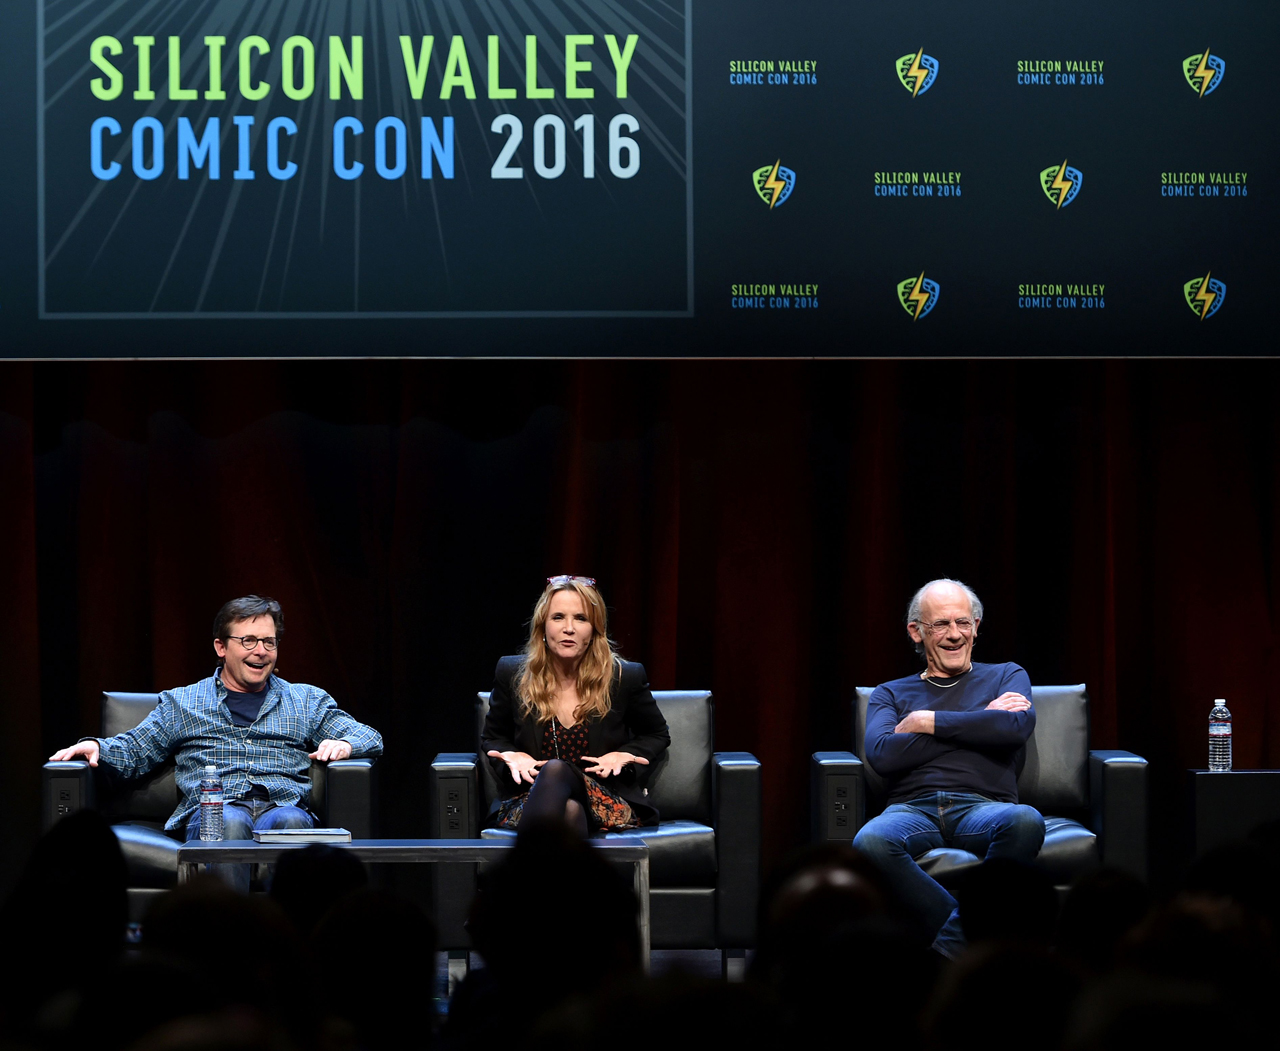 Michael J. Fox (L), Lea Thompson (C) and Christopher Lloyd (R) take part in a panel discussion on "Back to the Future" during te Silicon Valley Comic Con in San Jose, California on March 19, 2016.  The comic and entertainment-themed event features exhibits, panel discussions and pop culture artistry. Fox, Lloyd and Thompson starred the 1985 US science-fiction adventure comedy film "Back to the Future." / AFP / JOSH EDELSON        (Photo credit should read JOSH EDELSON/AFP/Getty Images)